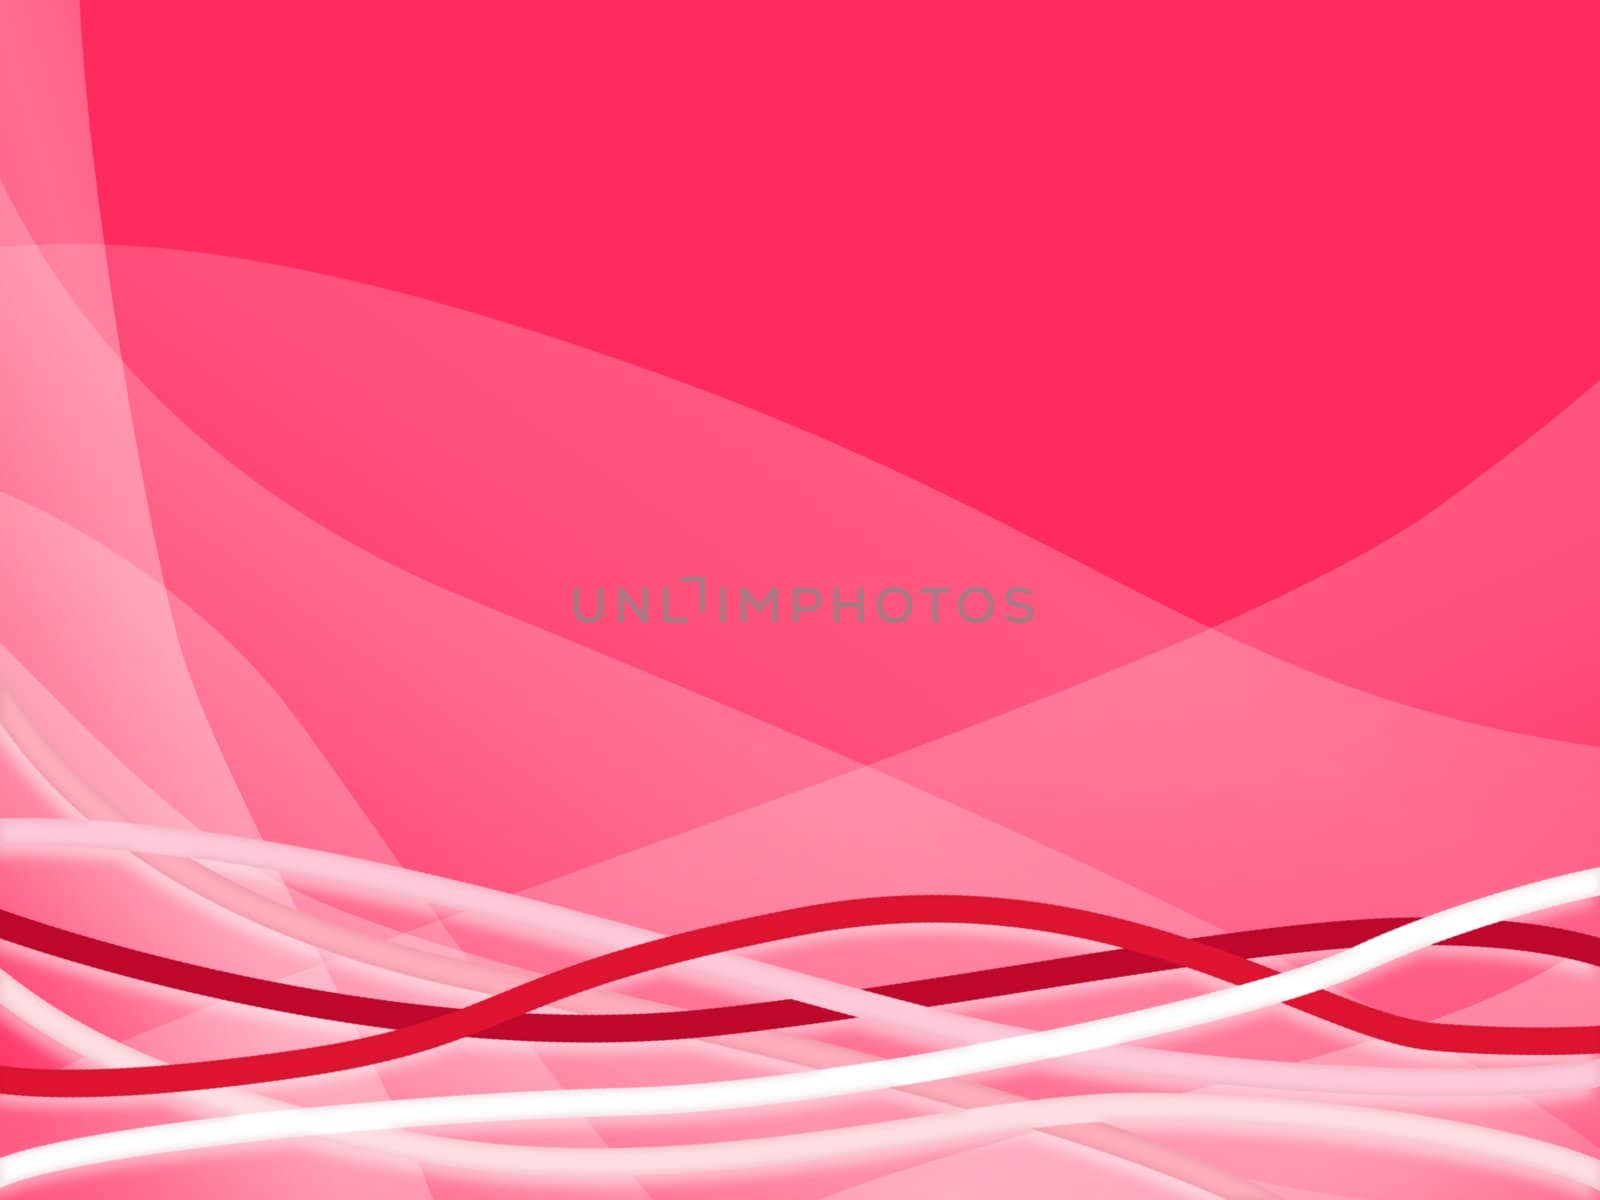 Rose background with red and white threads